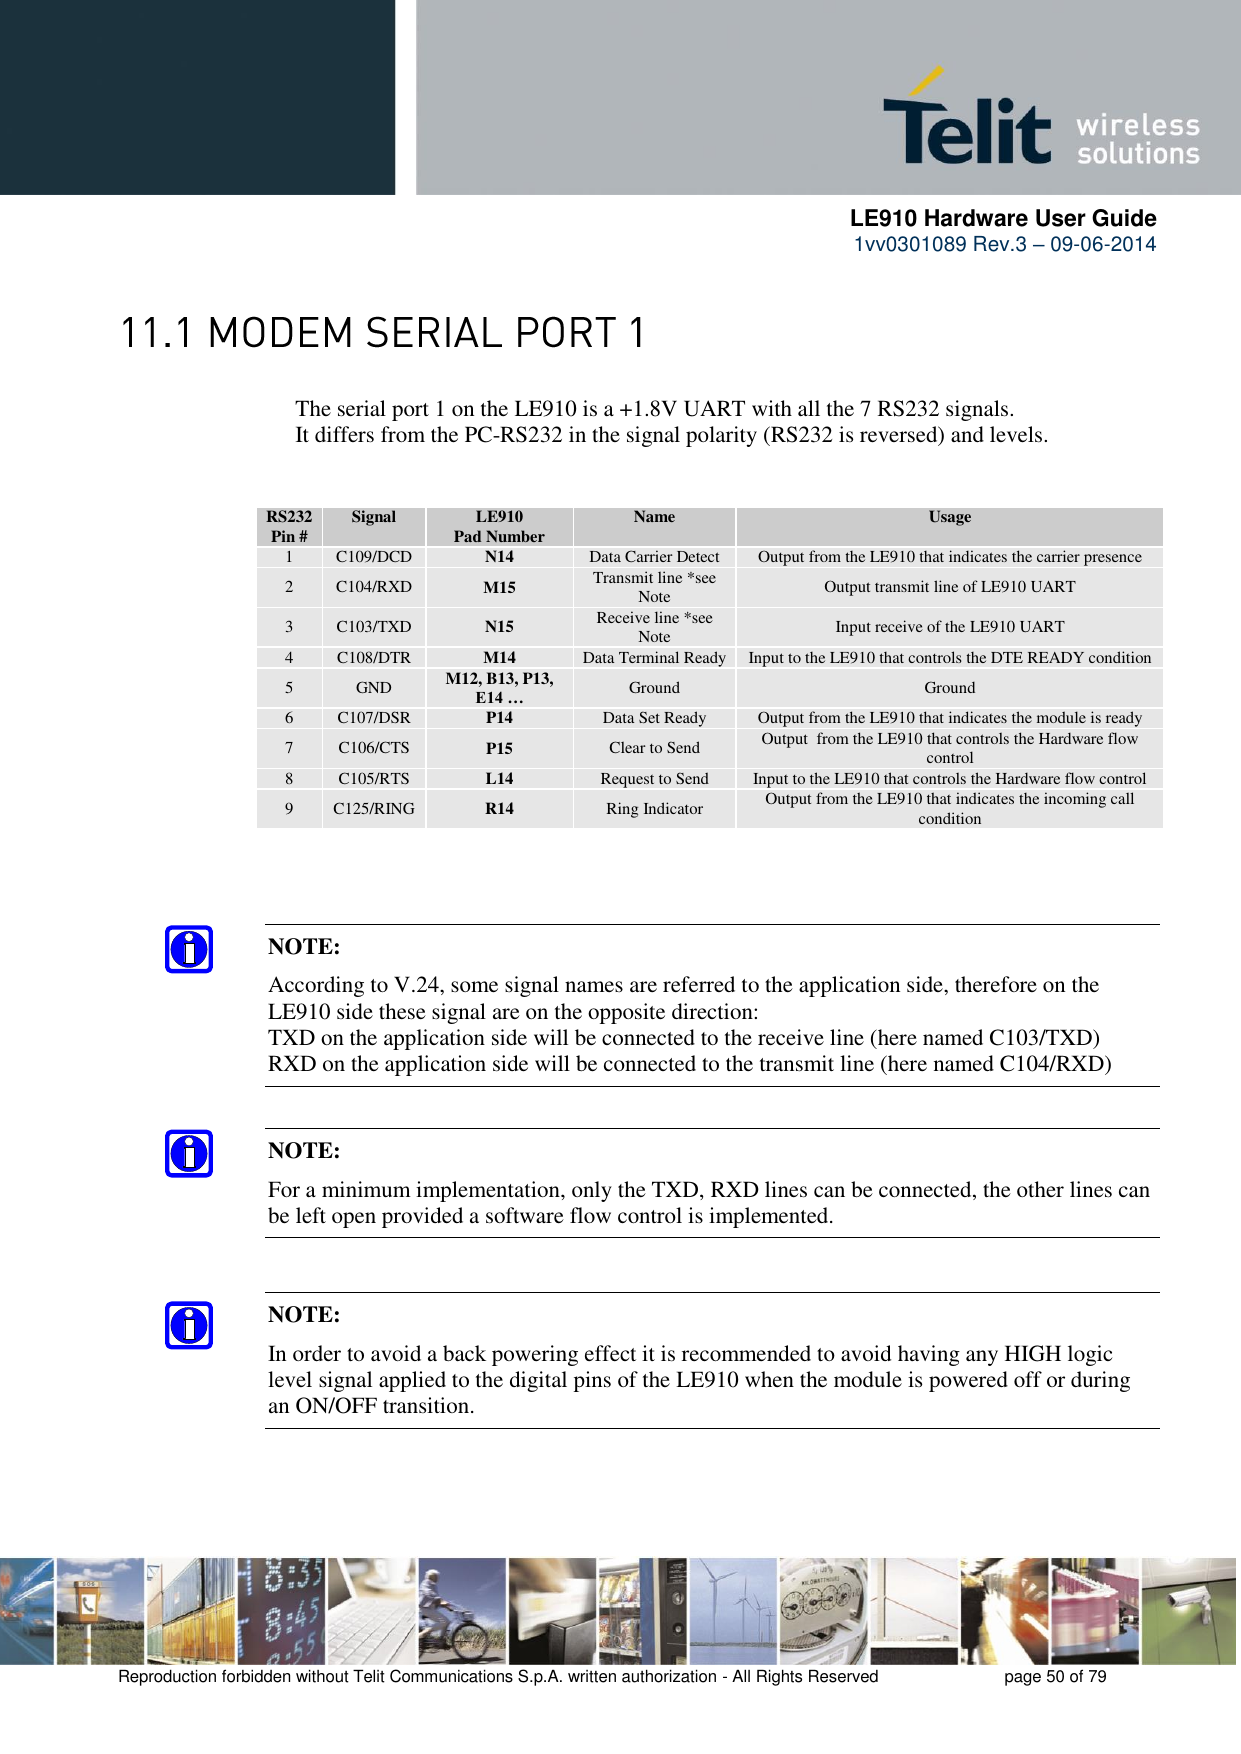      LE910 Hardware User Guide 1vv0301089 Rev.3 – 09-06-2014    Reproduction forbidden without Telit Communications S.p.A. written authorization - All Rights Reserved    page 50 of 79   The serial port 1 on the LE910 is a +1.8V UART with all the 7 RS232 signals.      It differs from the PC-RS232 in the signal polarity (RS232 is reversed) and levels. RS232 Pin # Signal LE910 Pad Number Name Usage 1 C109/DCD N14 Data Carrier Detect Output from the LE910 that indicates the carrier presence 2 C104/RXD M15 Transmit line *see Note Output transmit line of LE910 UART 3 C103/TXD N15 Receive line *see Note Input receive of the LE910 UART 4 C108/DTR M14 Data Terminal Ready Input to the LE910 that controls the DTE READY condition 5 GND M12, B13, P13, E14 … Ground Ground 6 C107/DSR P14 Data Set Ready Output from the LE910 that indicates the module is ready 7 C106/CTS P15 Clear to Send Output  from the LE910 that controls the Hardware flow control 8 C105/RTS L14 Request to Send Input to the LE910 that controls the Hardware flow control 9 C125/RING R14 Ring Indicator Output from the LE910 that indicates the incoming call condition   NOTE: According to V.24, some signal names are referred to the application side, therefore on the LE910 side these signal are on the opposite direction:  TXD on the application side will be connected to the receive line (here named C103/TXD) RXD on the application side will be connected to the transmit line (here named C104/RXD) NOTE: For a minimum implementation, only the TXD, RXD lines can be connected, the other lines can be left open provided a software flow control is implemented. NOTE: In order to avoid a back powering effect it is recommended to avoid having any HIGH logic level signal applied to the digital pins of the LE910 when the module is powered off or during an ON/OFF transition. 